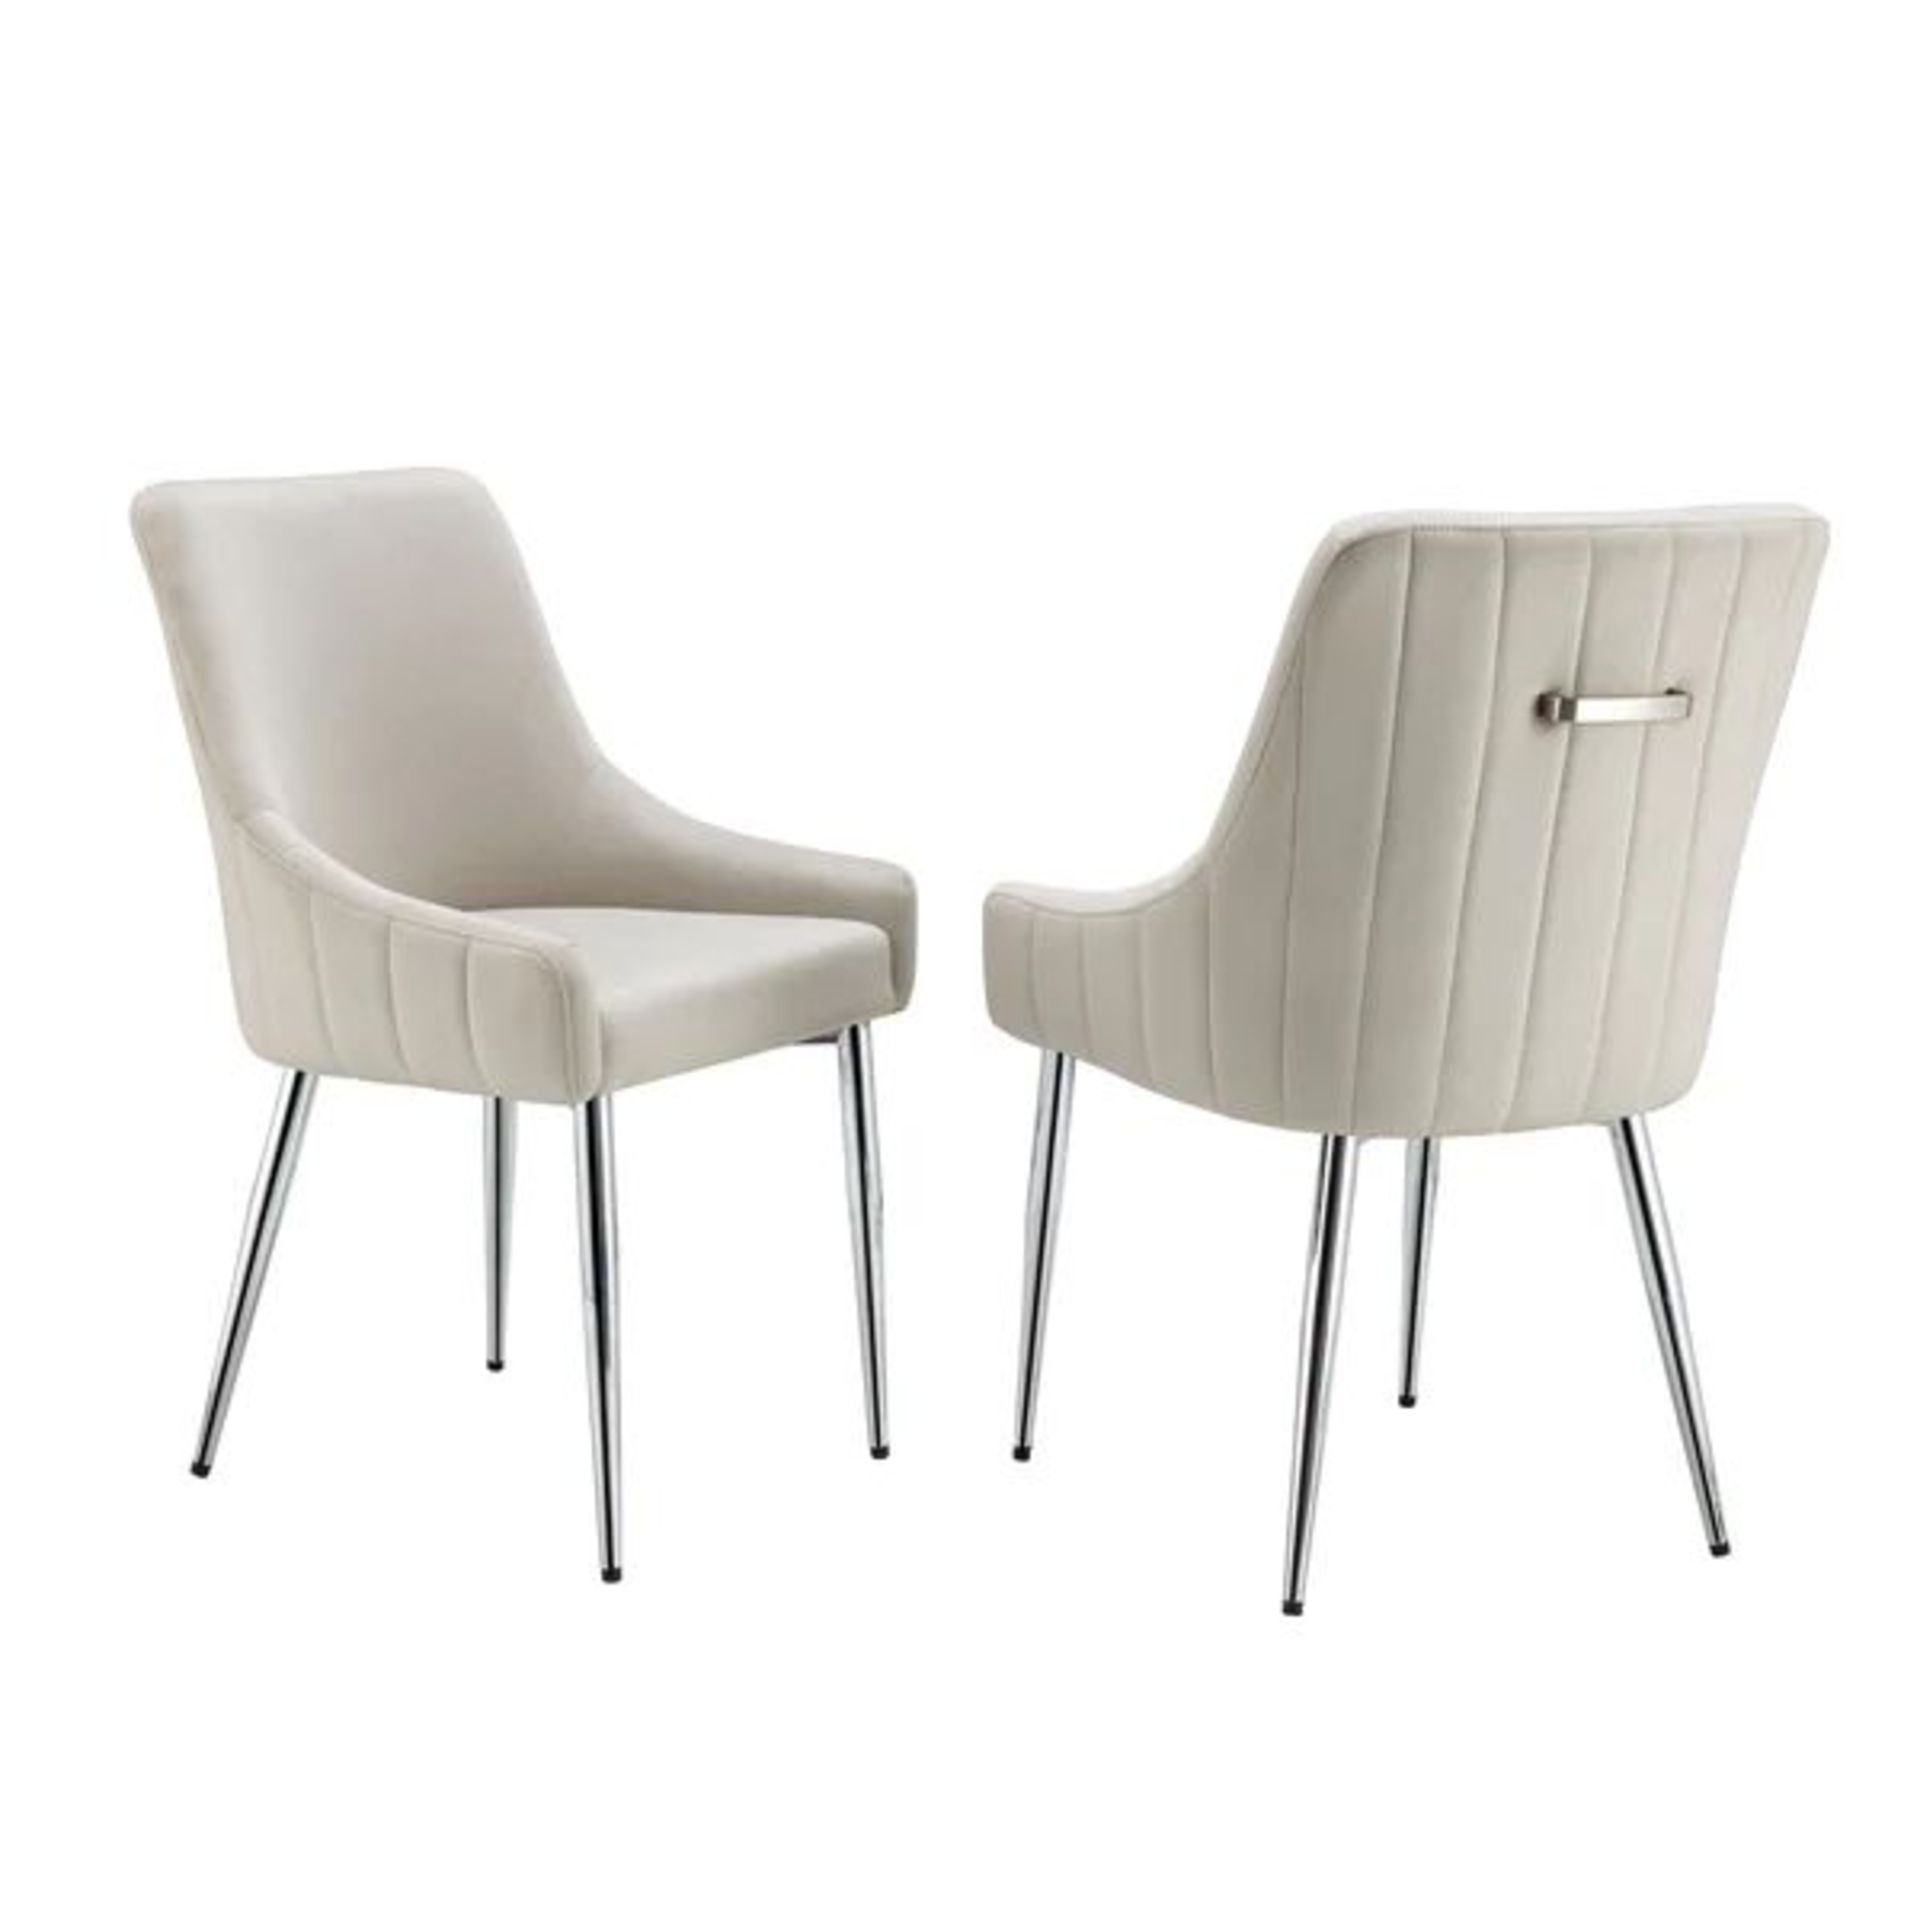 Garnet Set of 2 Champagne Velvet Upholstered Dining Chairs with Back Handle. -R14. RRP £309.99. - Bild 2 aus 2